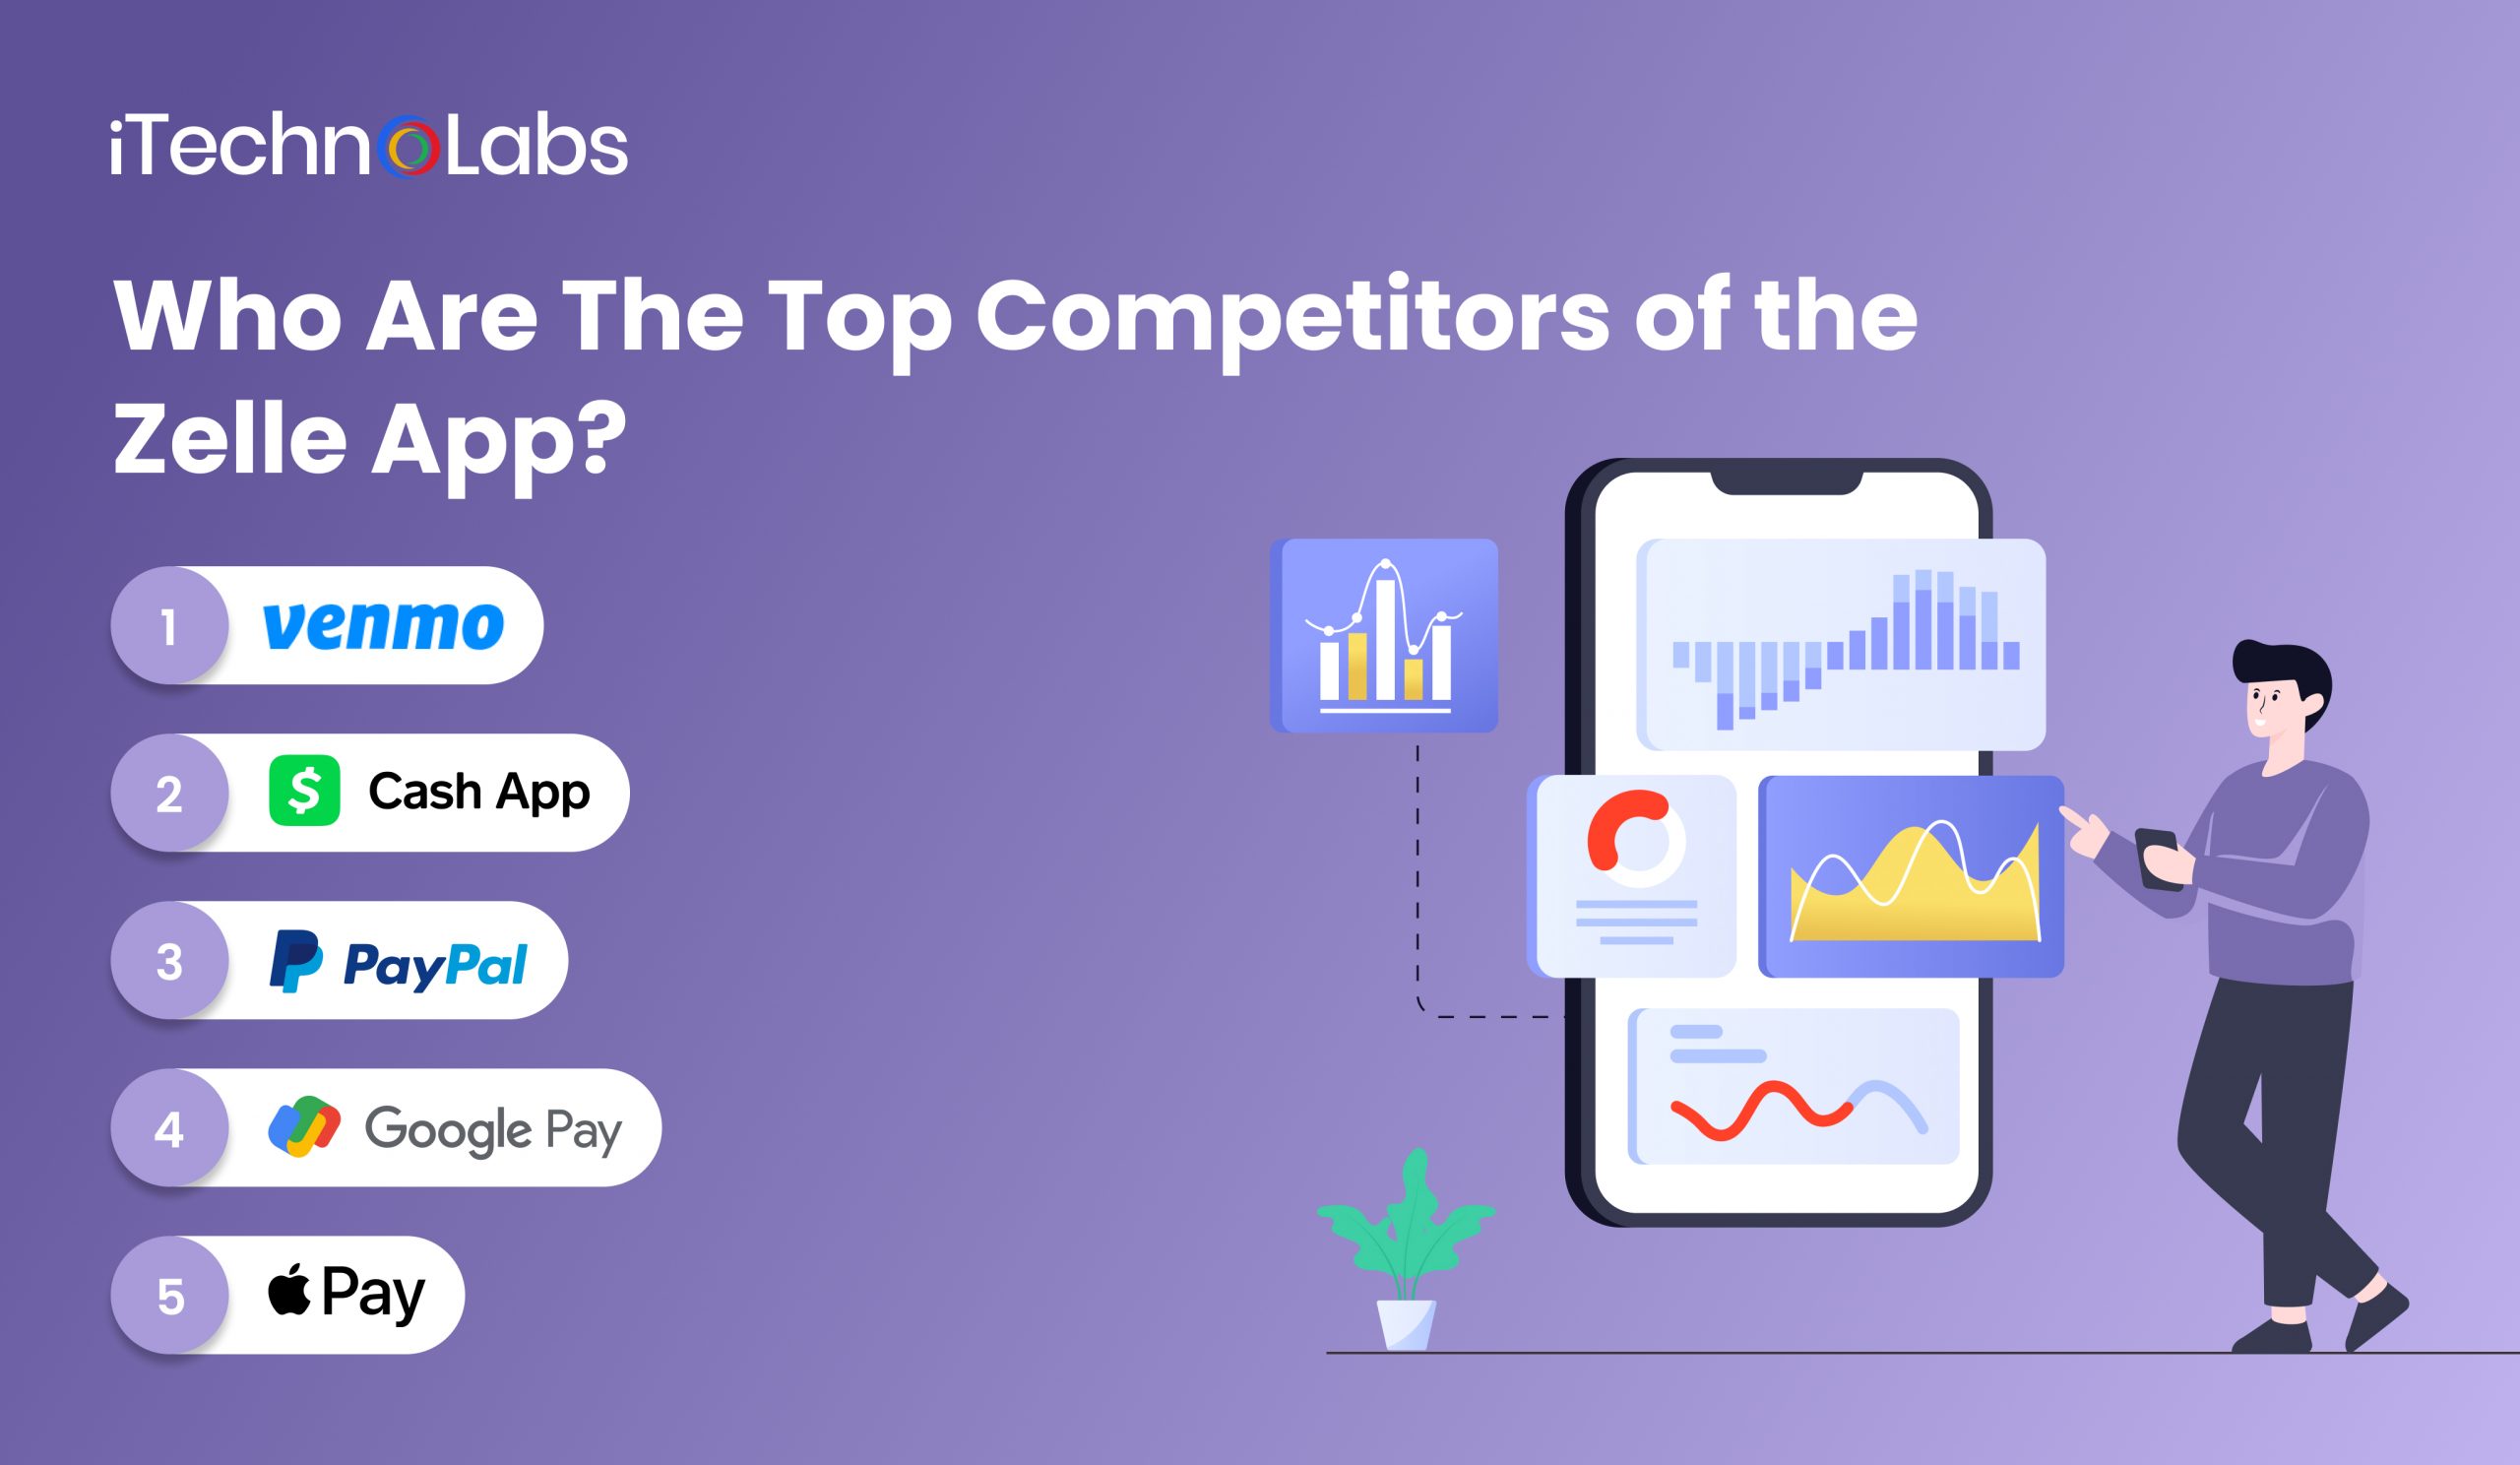 iTechnolabs-Who Are The Top Competitors of the Zelle App?